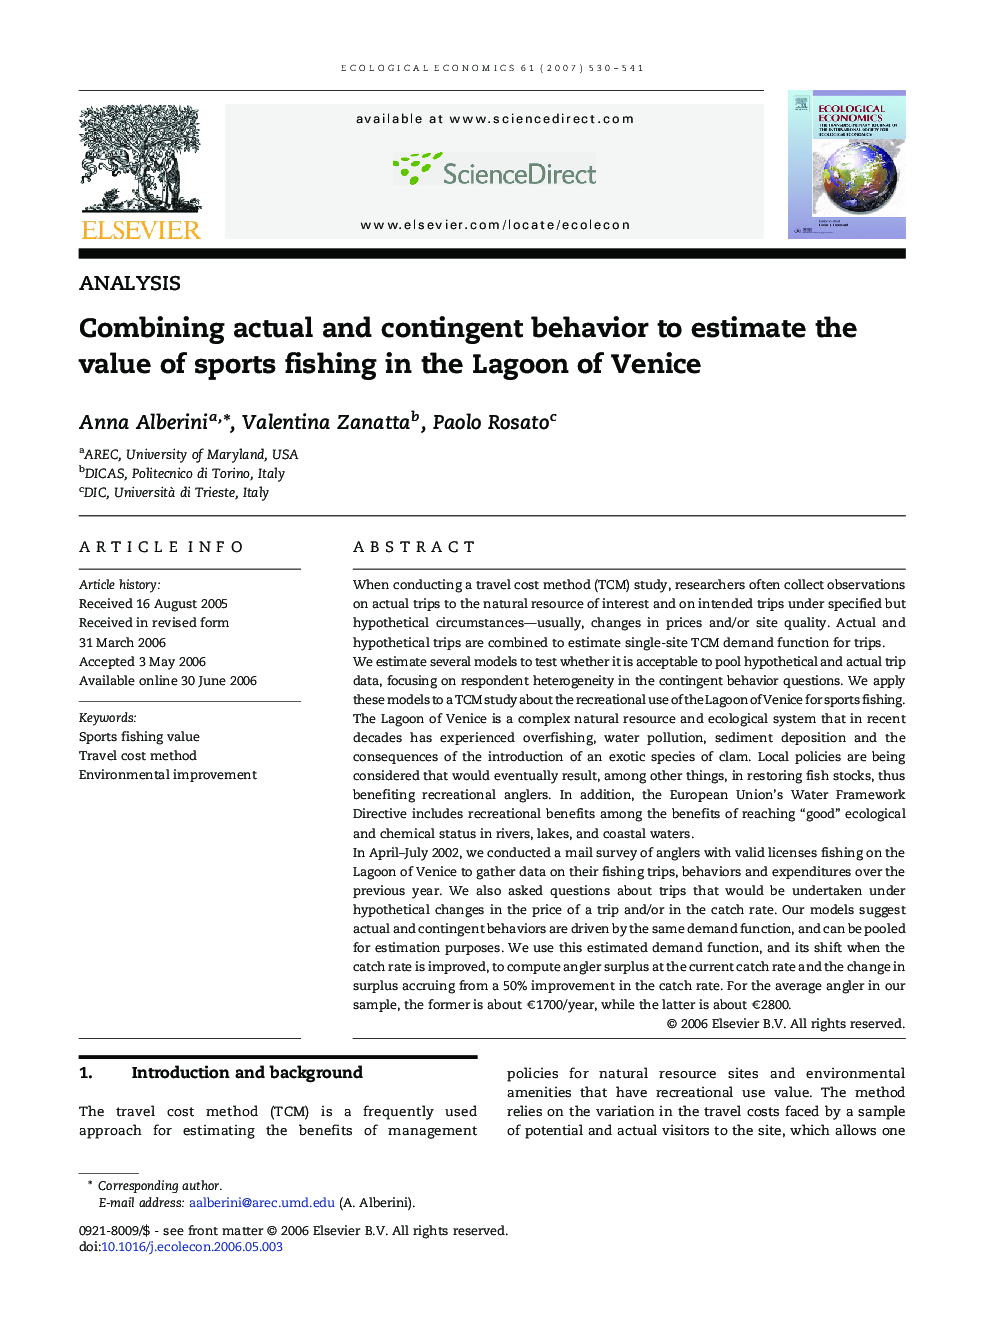 Combining actual and contingent behavior to estimate the value of sports fishing in the Lagoon of Venice